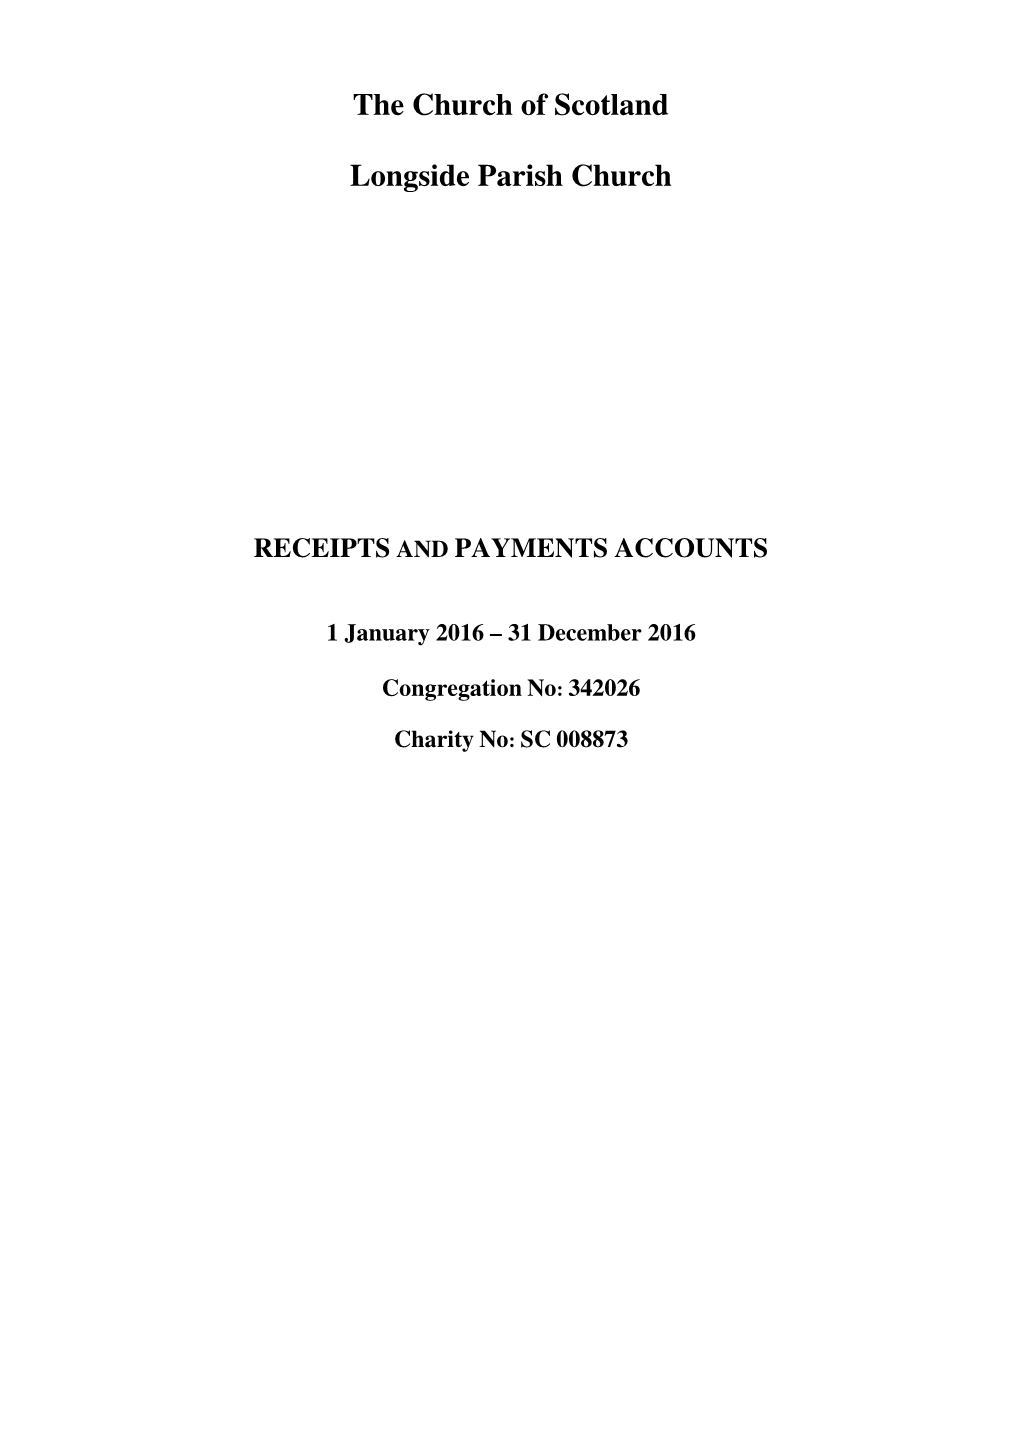 Receipts and Payments Accounts